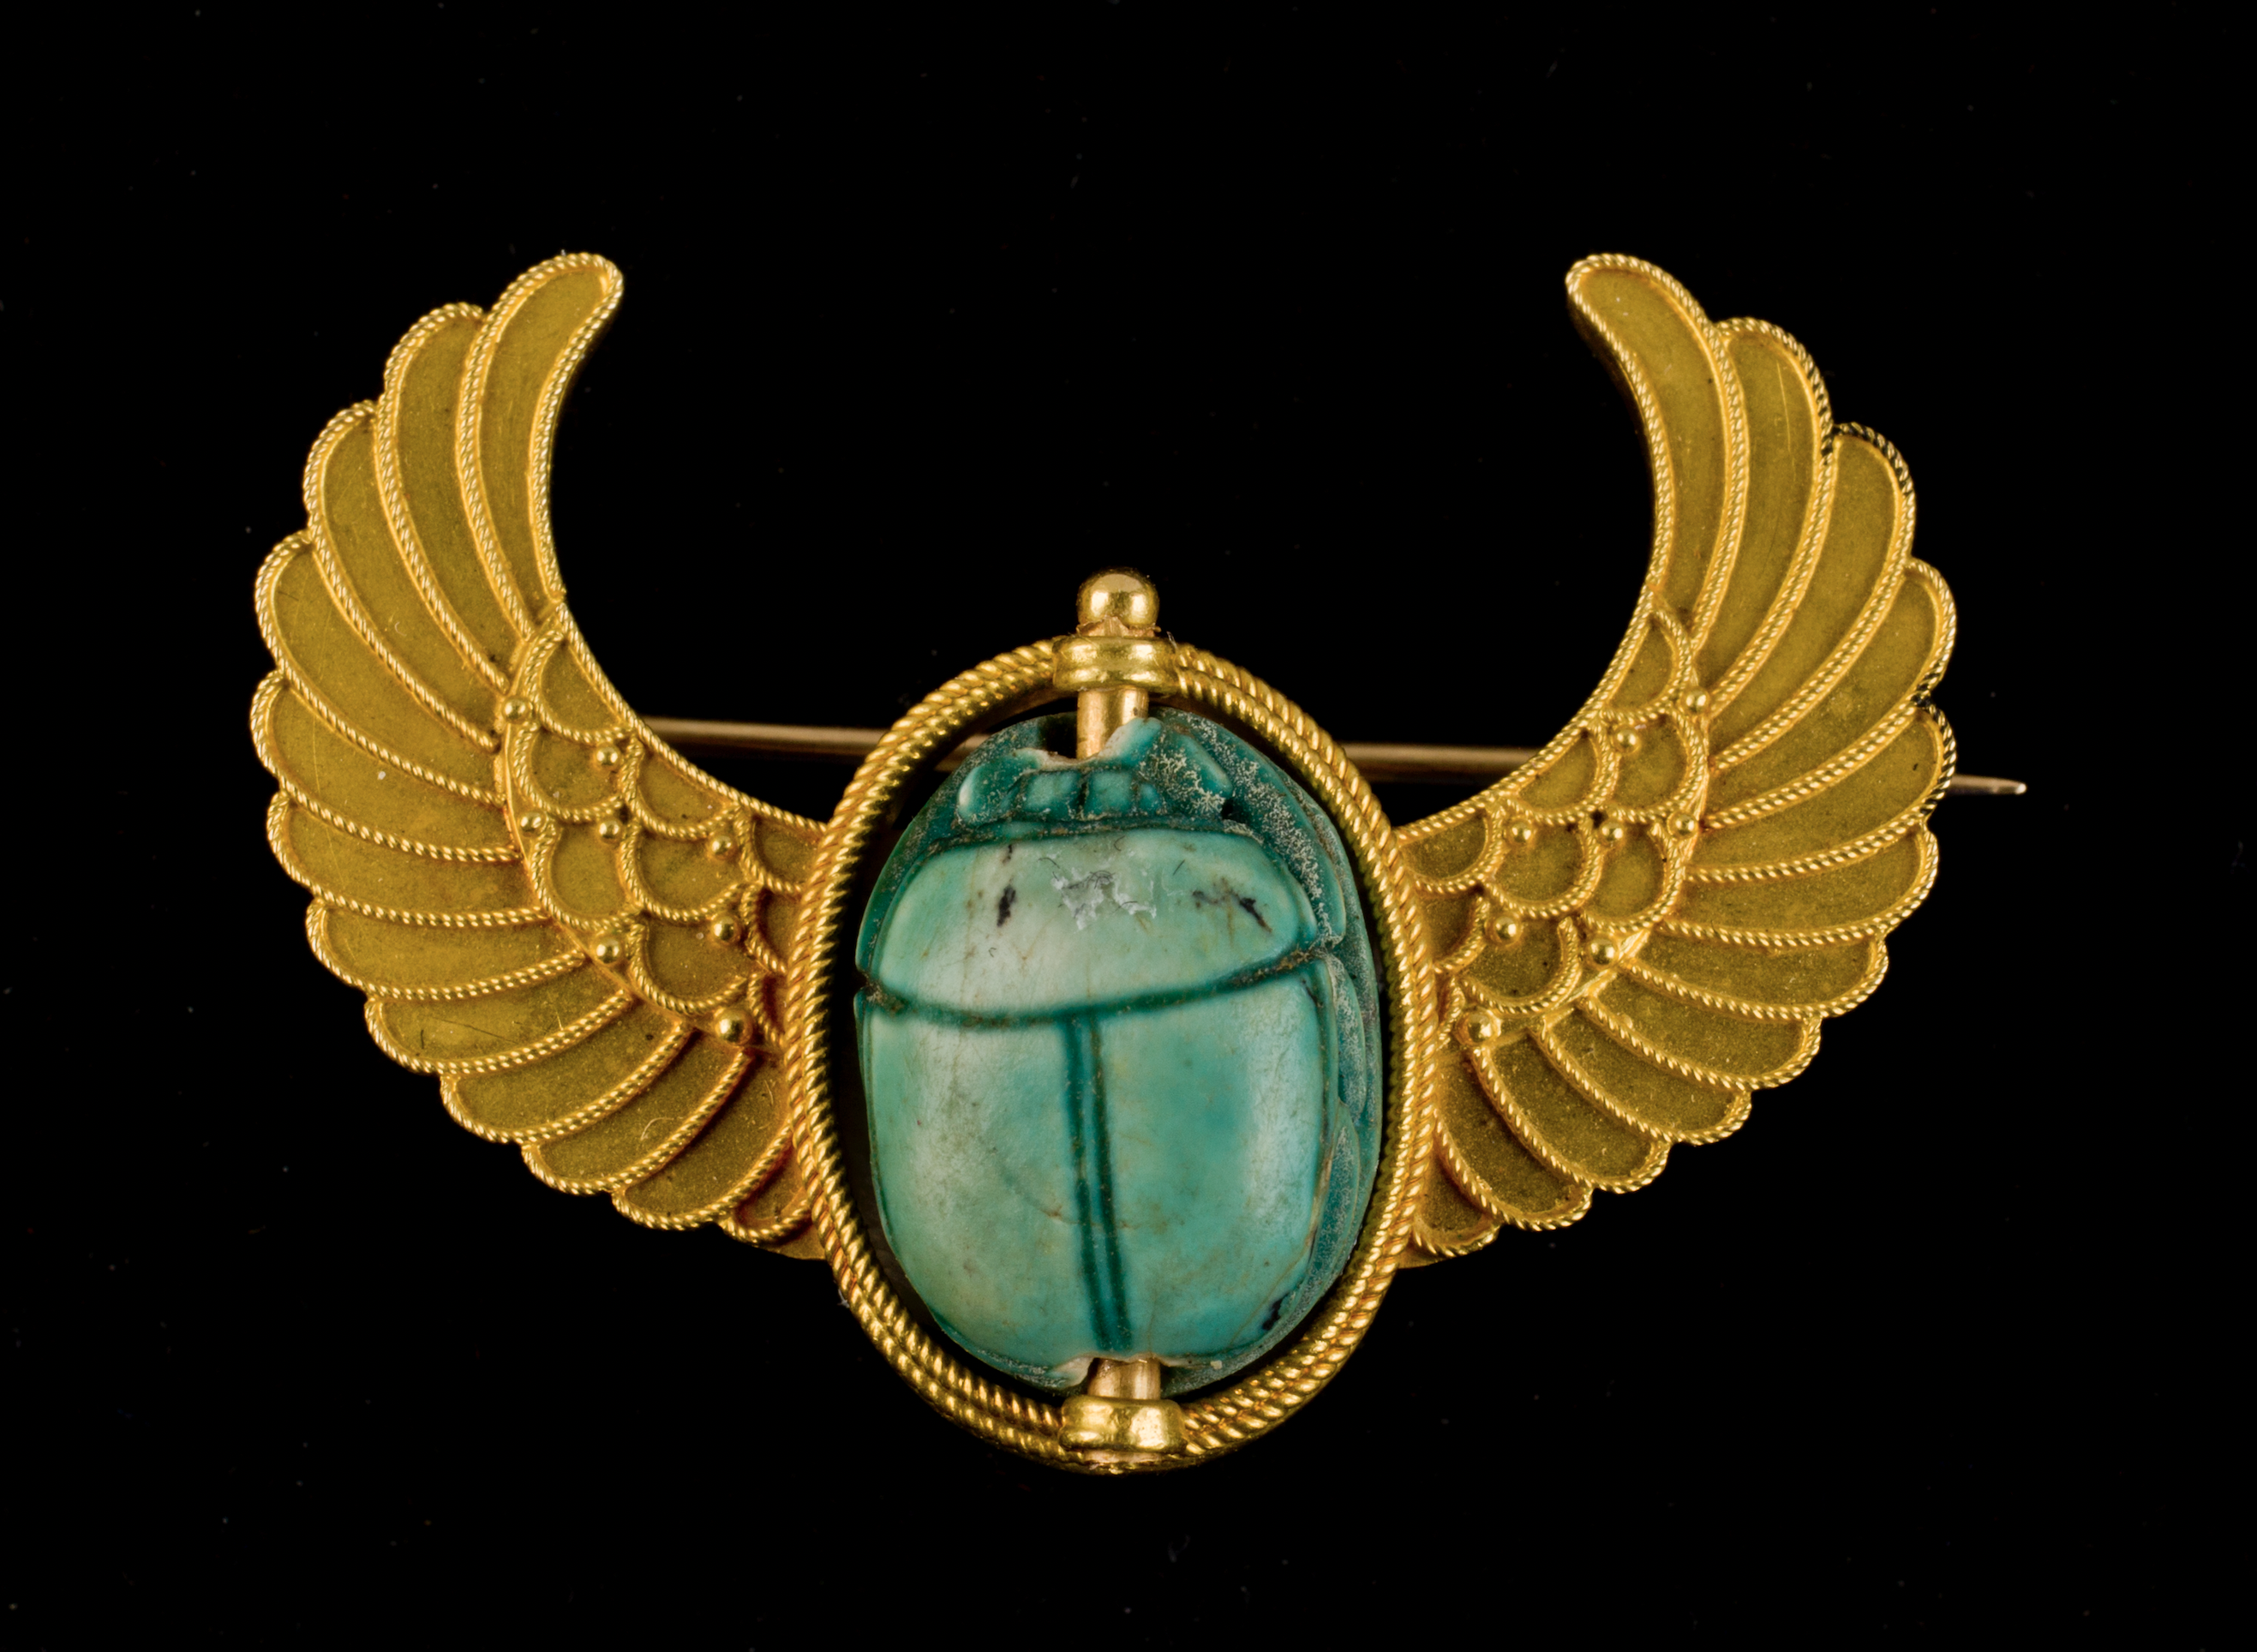 Brooch featuring an ancient scarab in a modern winged mount, scarab is ancient Egyptian, (scarab) New Kingdom, about 1539–1077 B.C.; (gold mount) early 1900s, glazed steatite and gold (modern), Mrs. Kingsmill Marrs Collection, Worcester Art Museum, 1926.86 